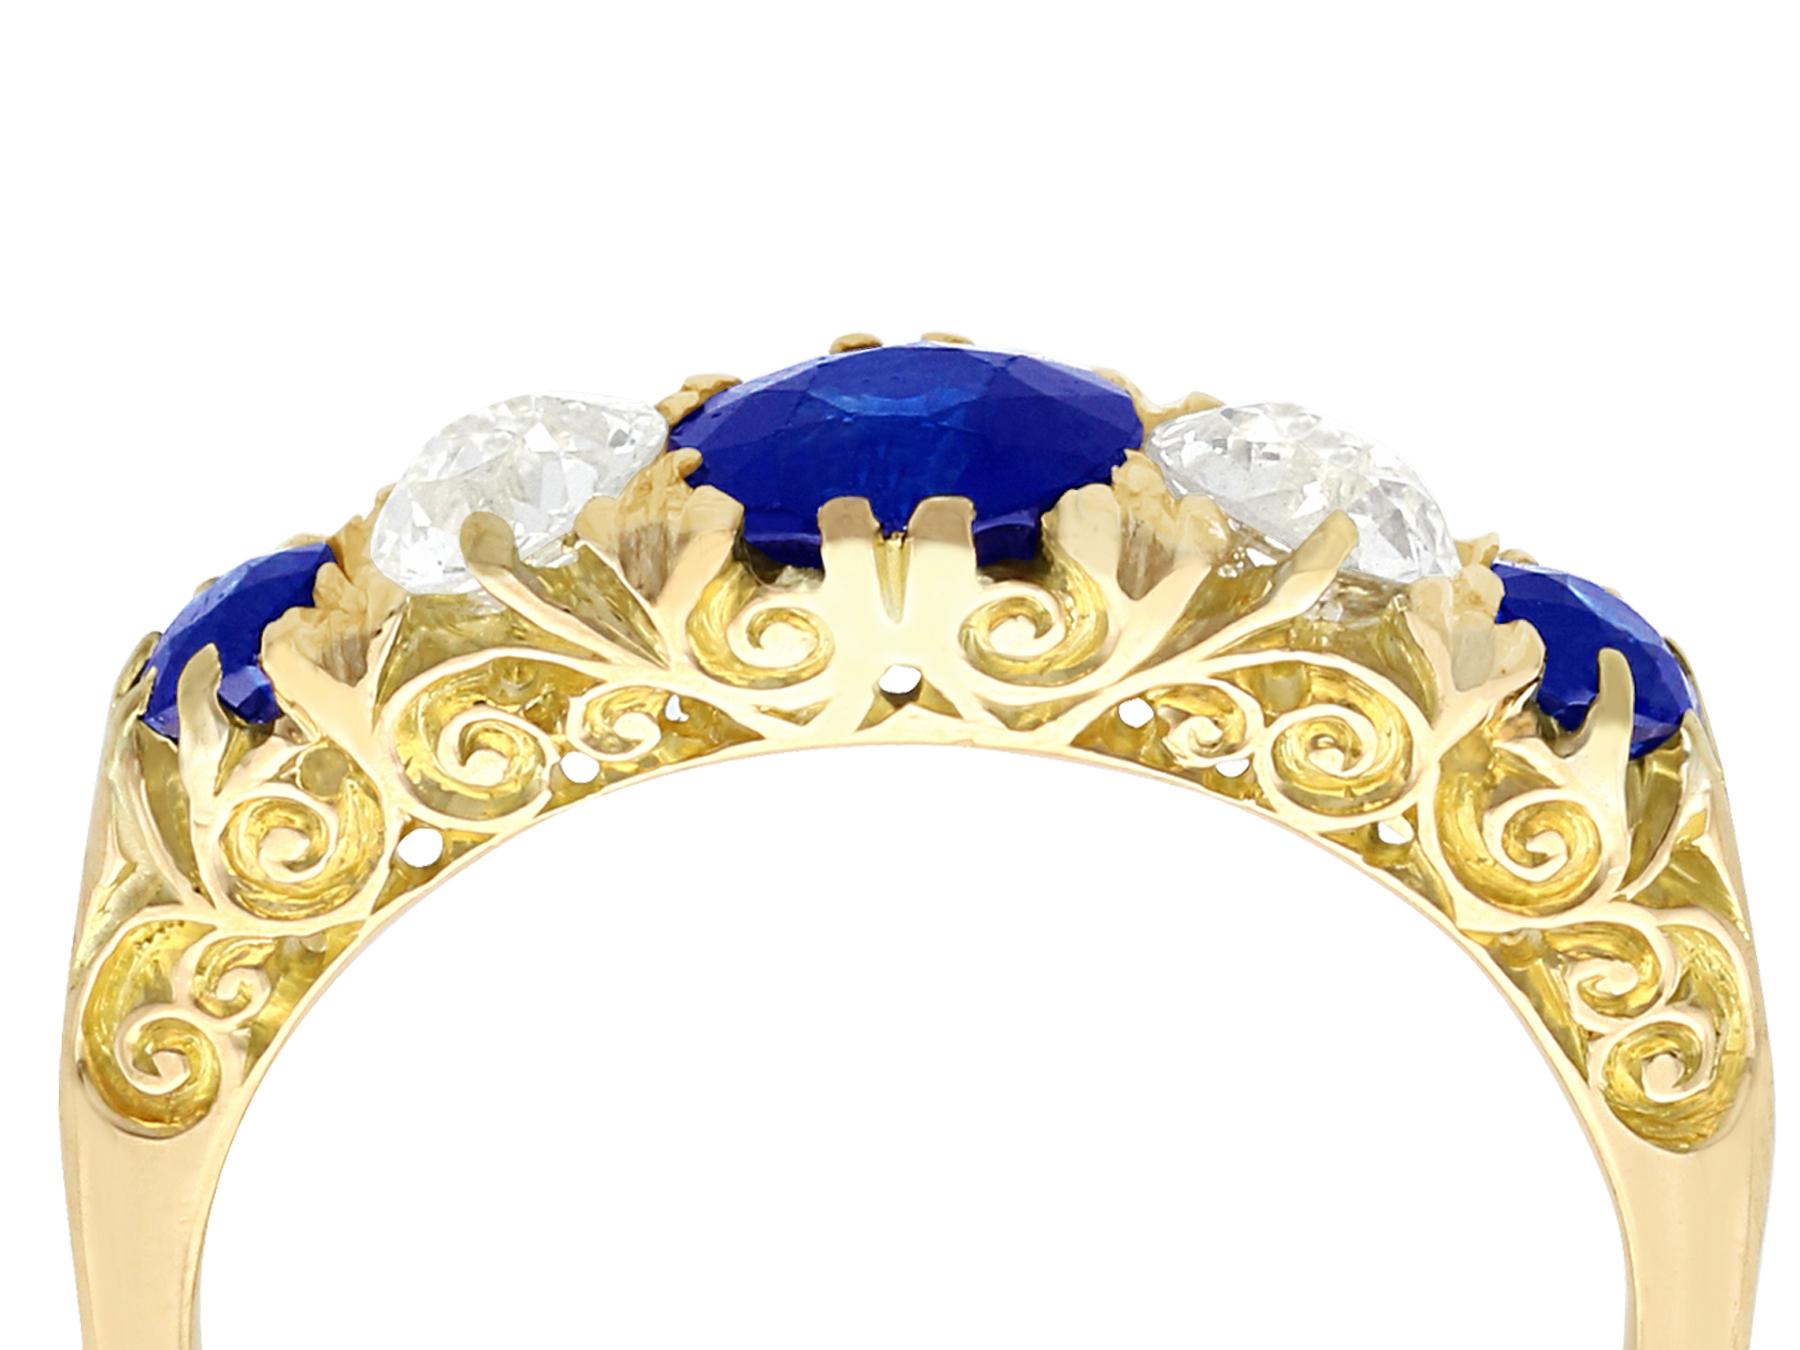 A stunning, fine and impressive antique 1.39 carat natural blue sapphire and 0.72 carat diamond, 18 karat yellow gold, five stone ring; part of our antique jewelry and estate jewelry collections.

This stunning antique sapphire and diamond ring has